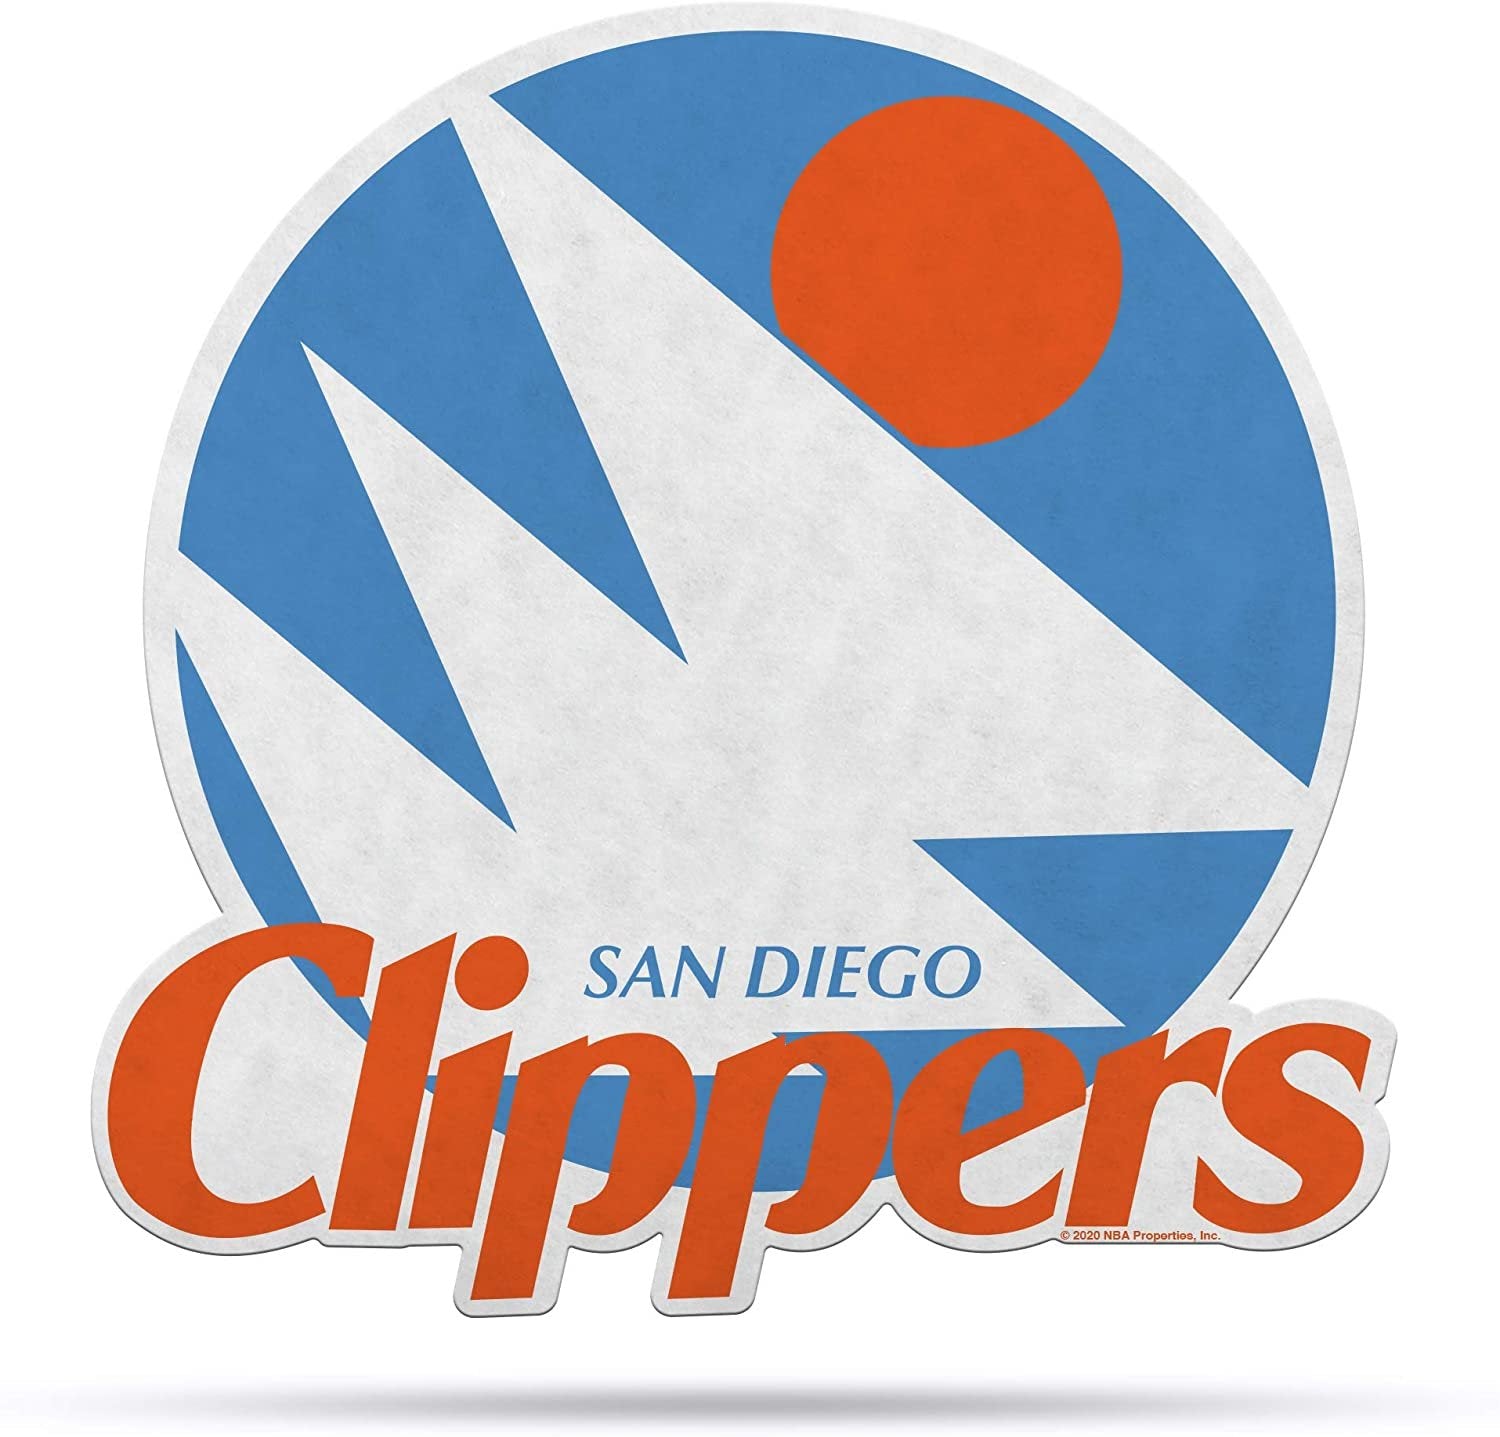 Los Angeles Clippers Soft Felt Pennant, Retro Design, Shape Cut, 18 Inch, Easy To Hang